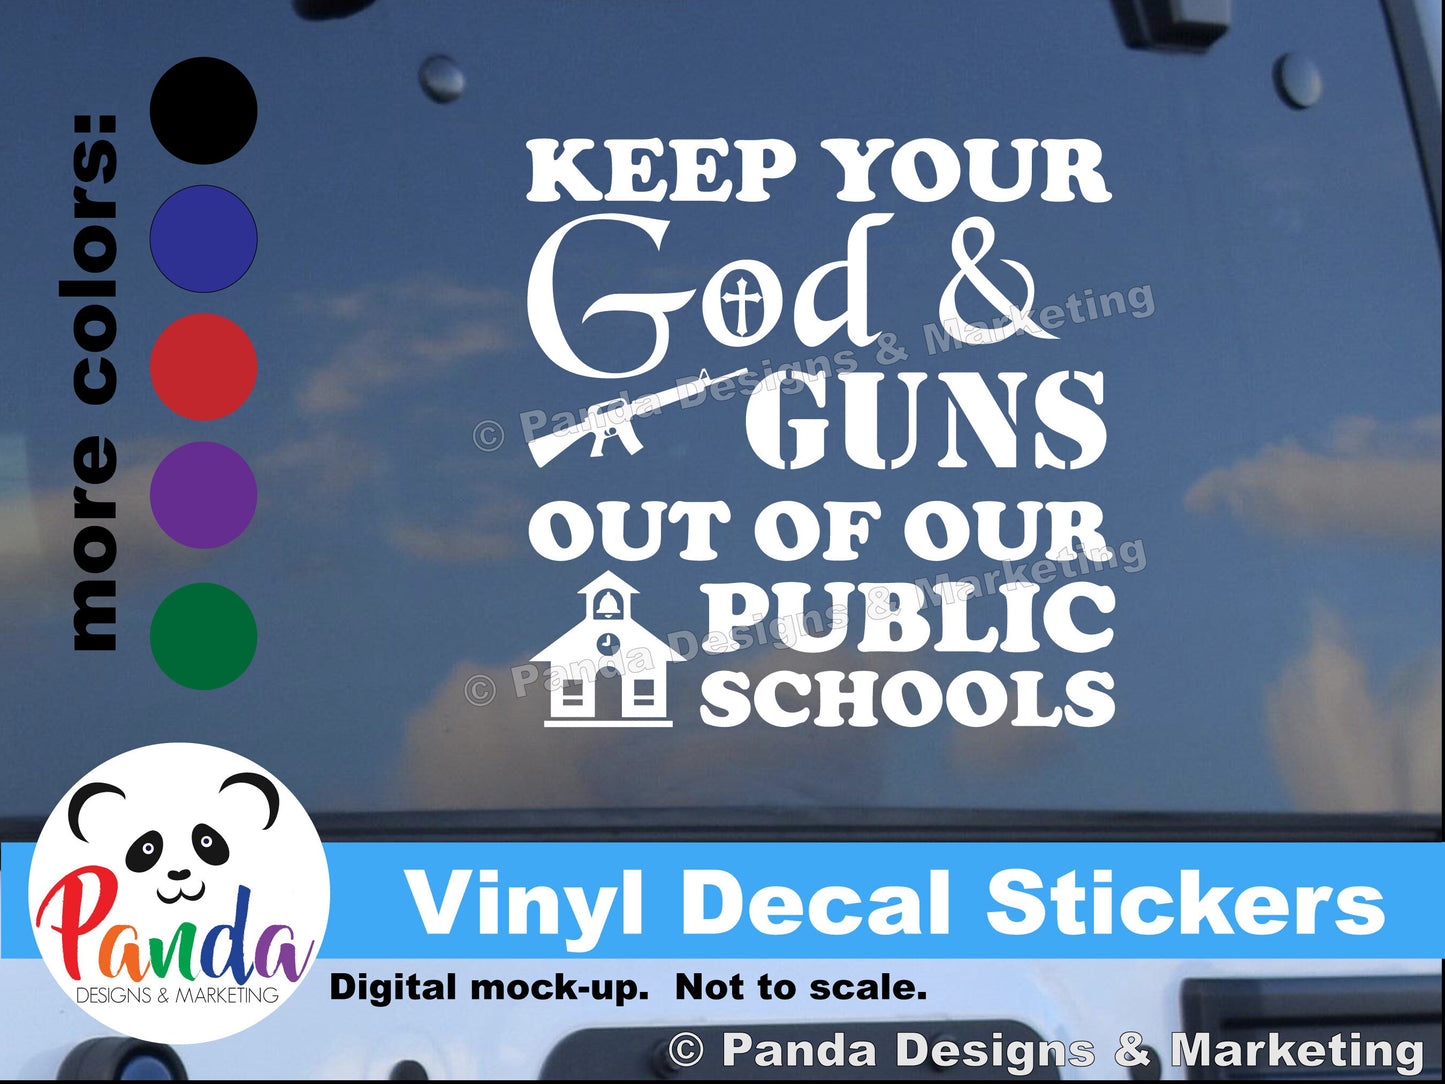 Keep Your God and Guns Out of Our Public Schools vinyl decal stickers for car, laptop, waterbottles, hydroflask, and more.